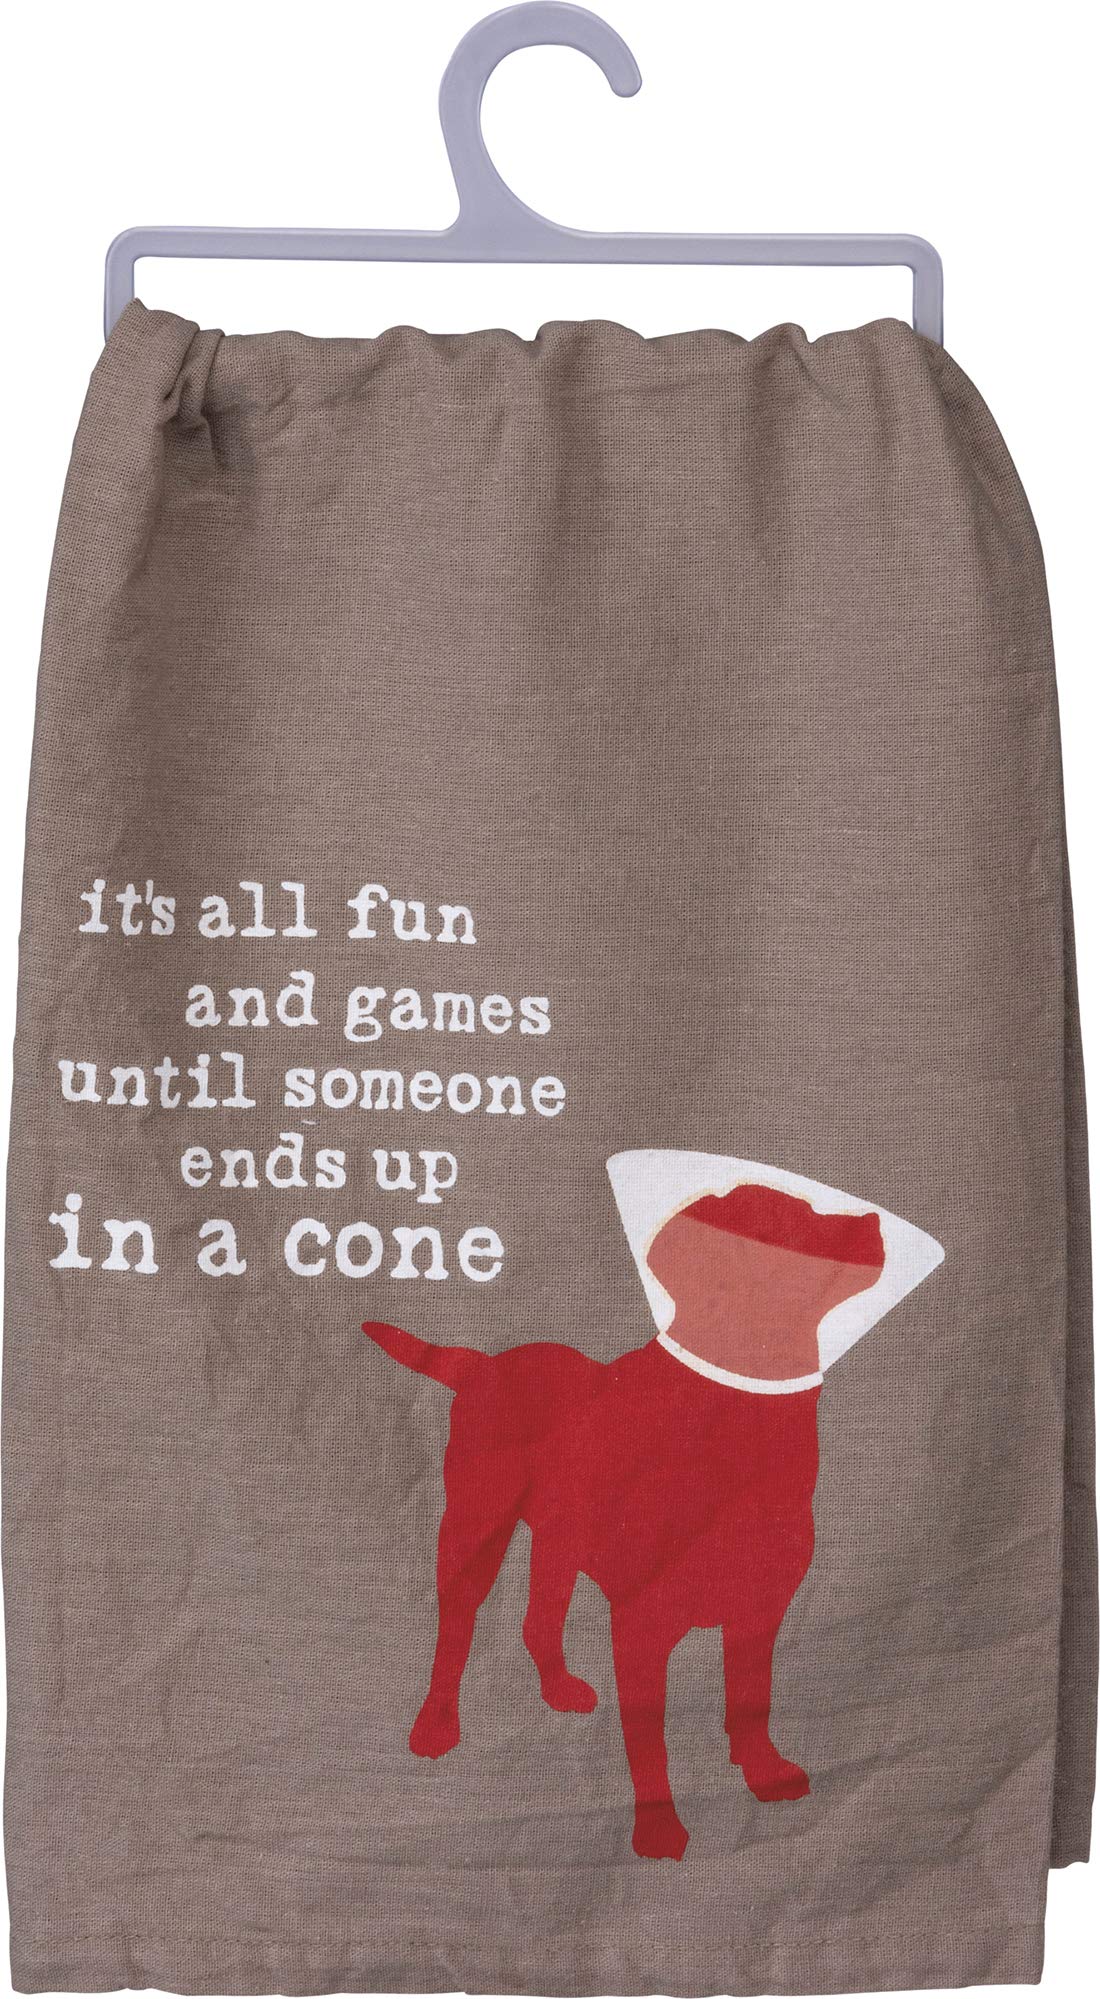 Primitives by Kathy Dish Towel - It's All Fun and Games Until Someone Ends Up in a Cone - 28 inch x 28 inch